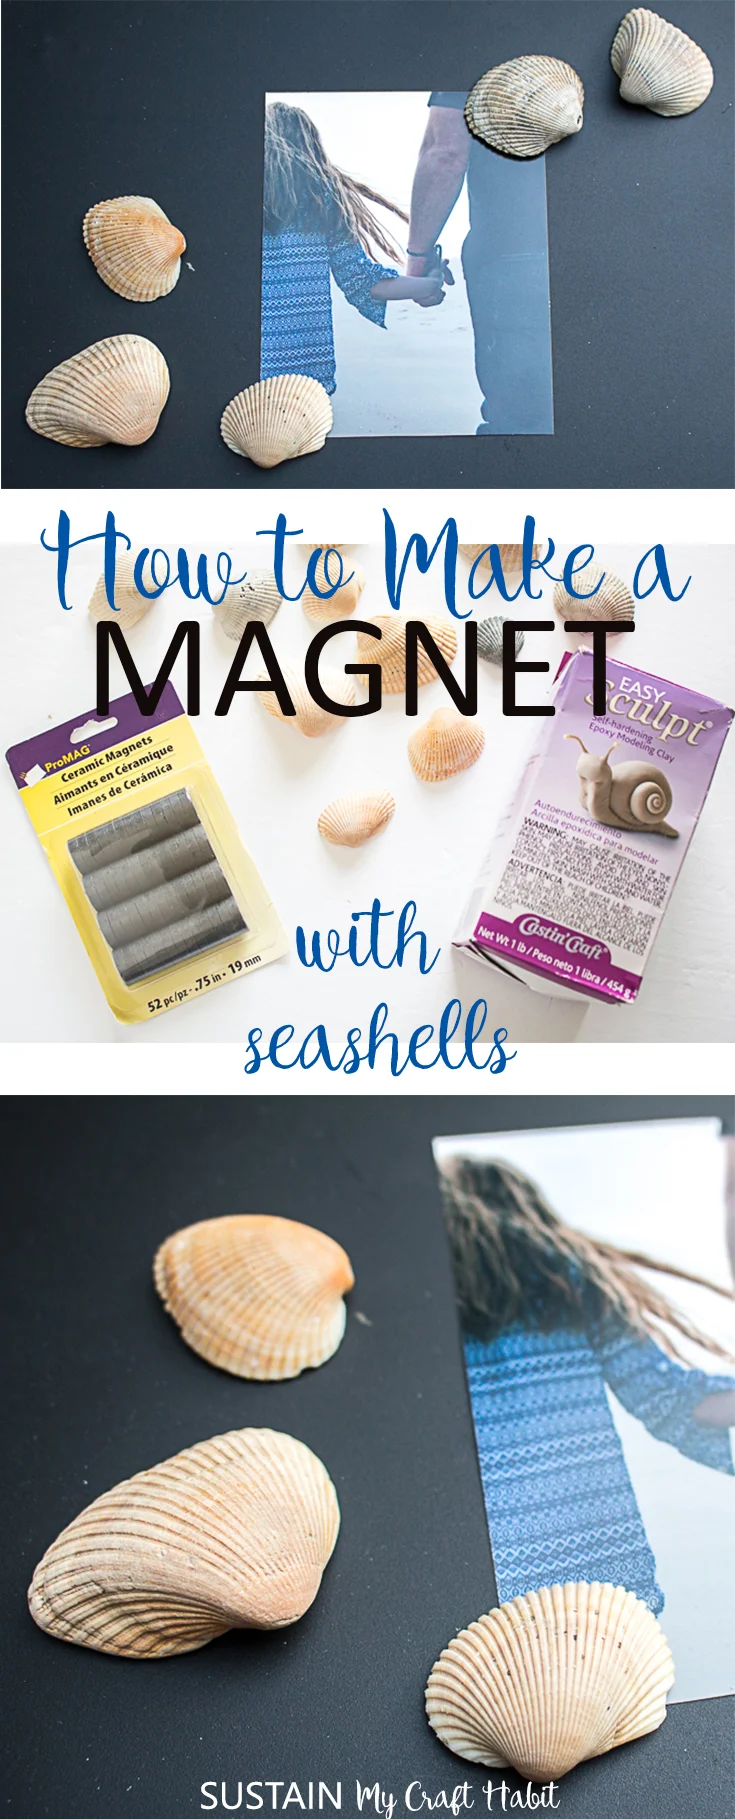 how to make a magnet with sea shells